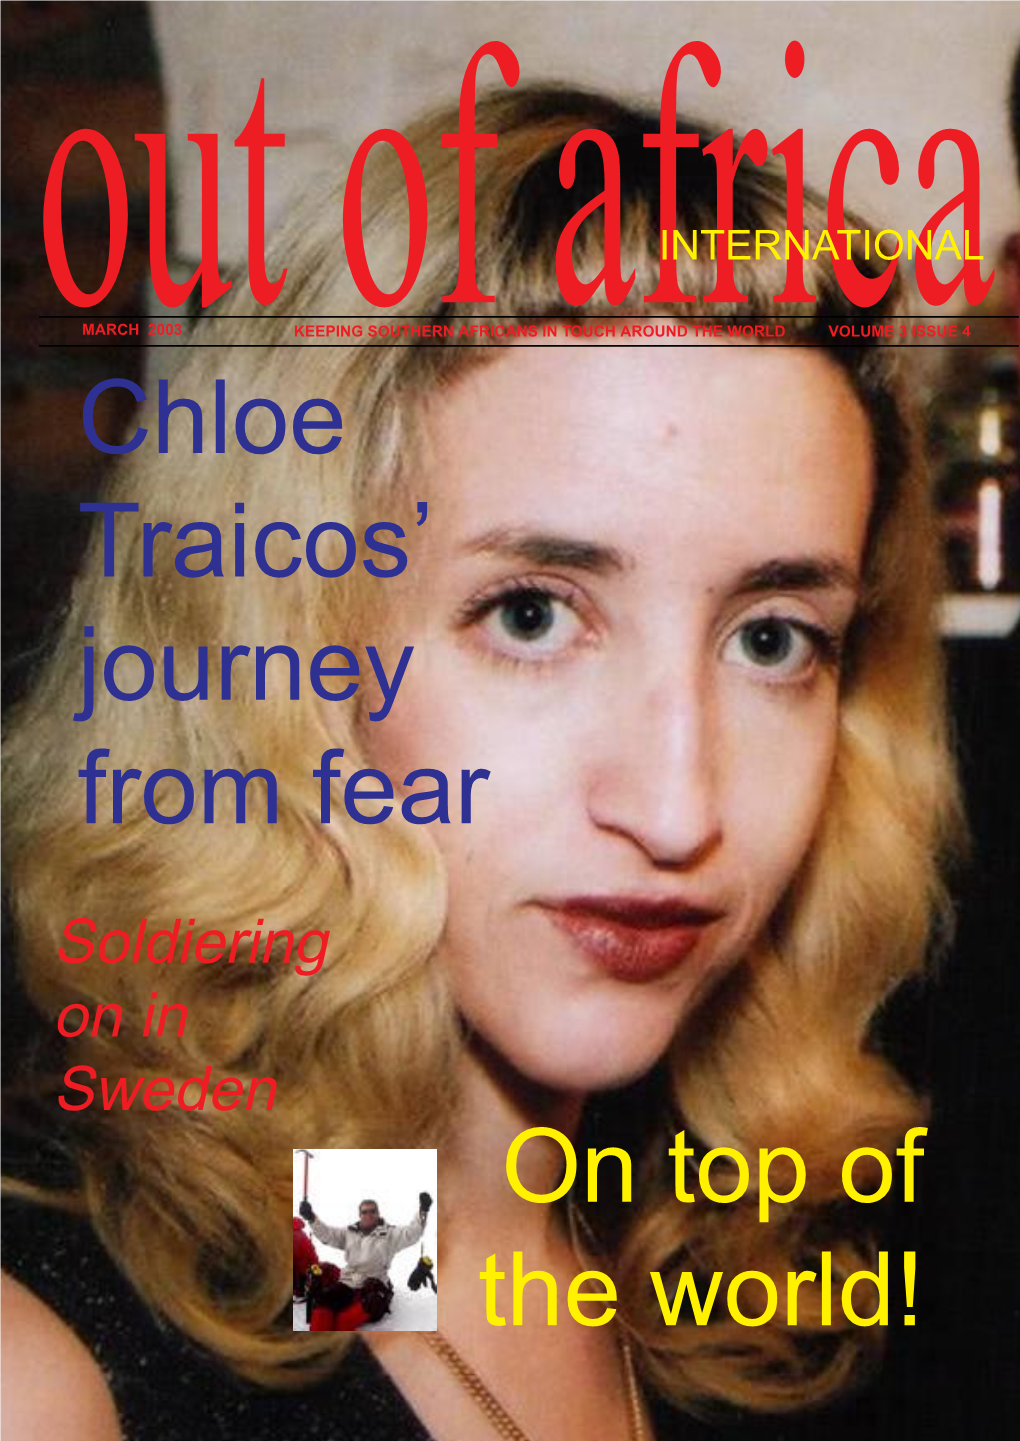 Chloe Traicos' Journey from Fear on Top of the World!